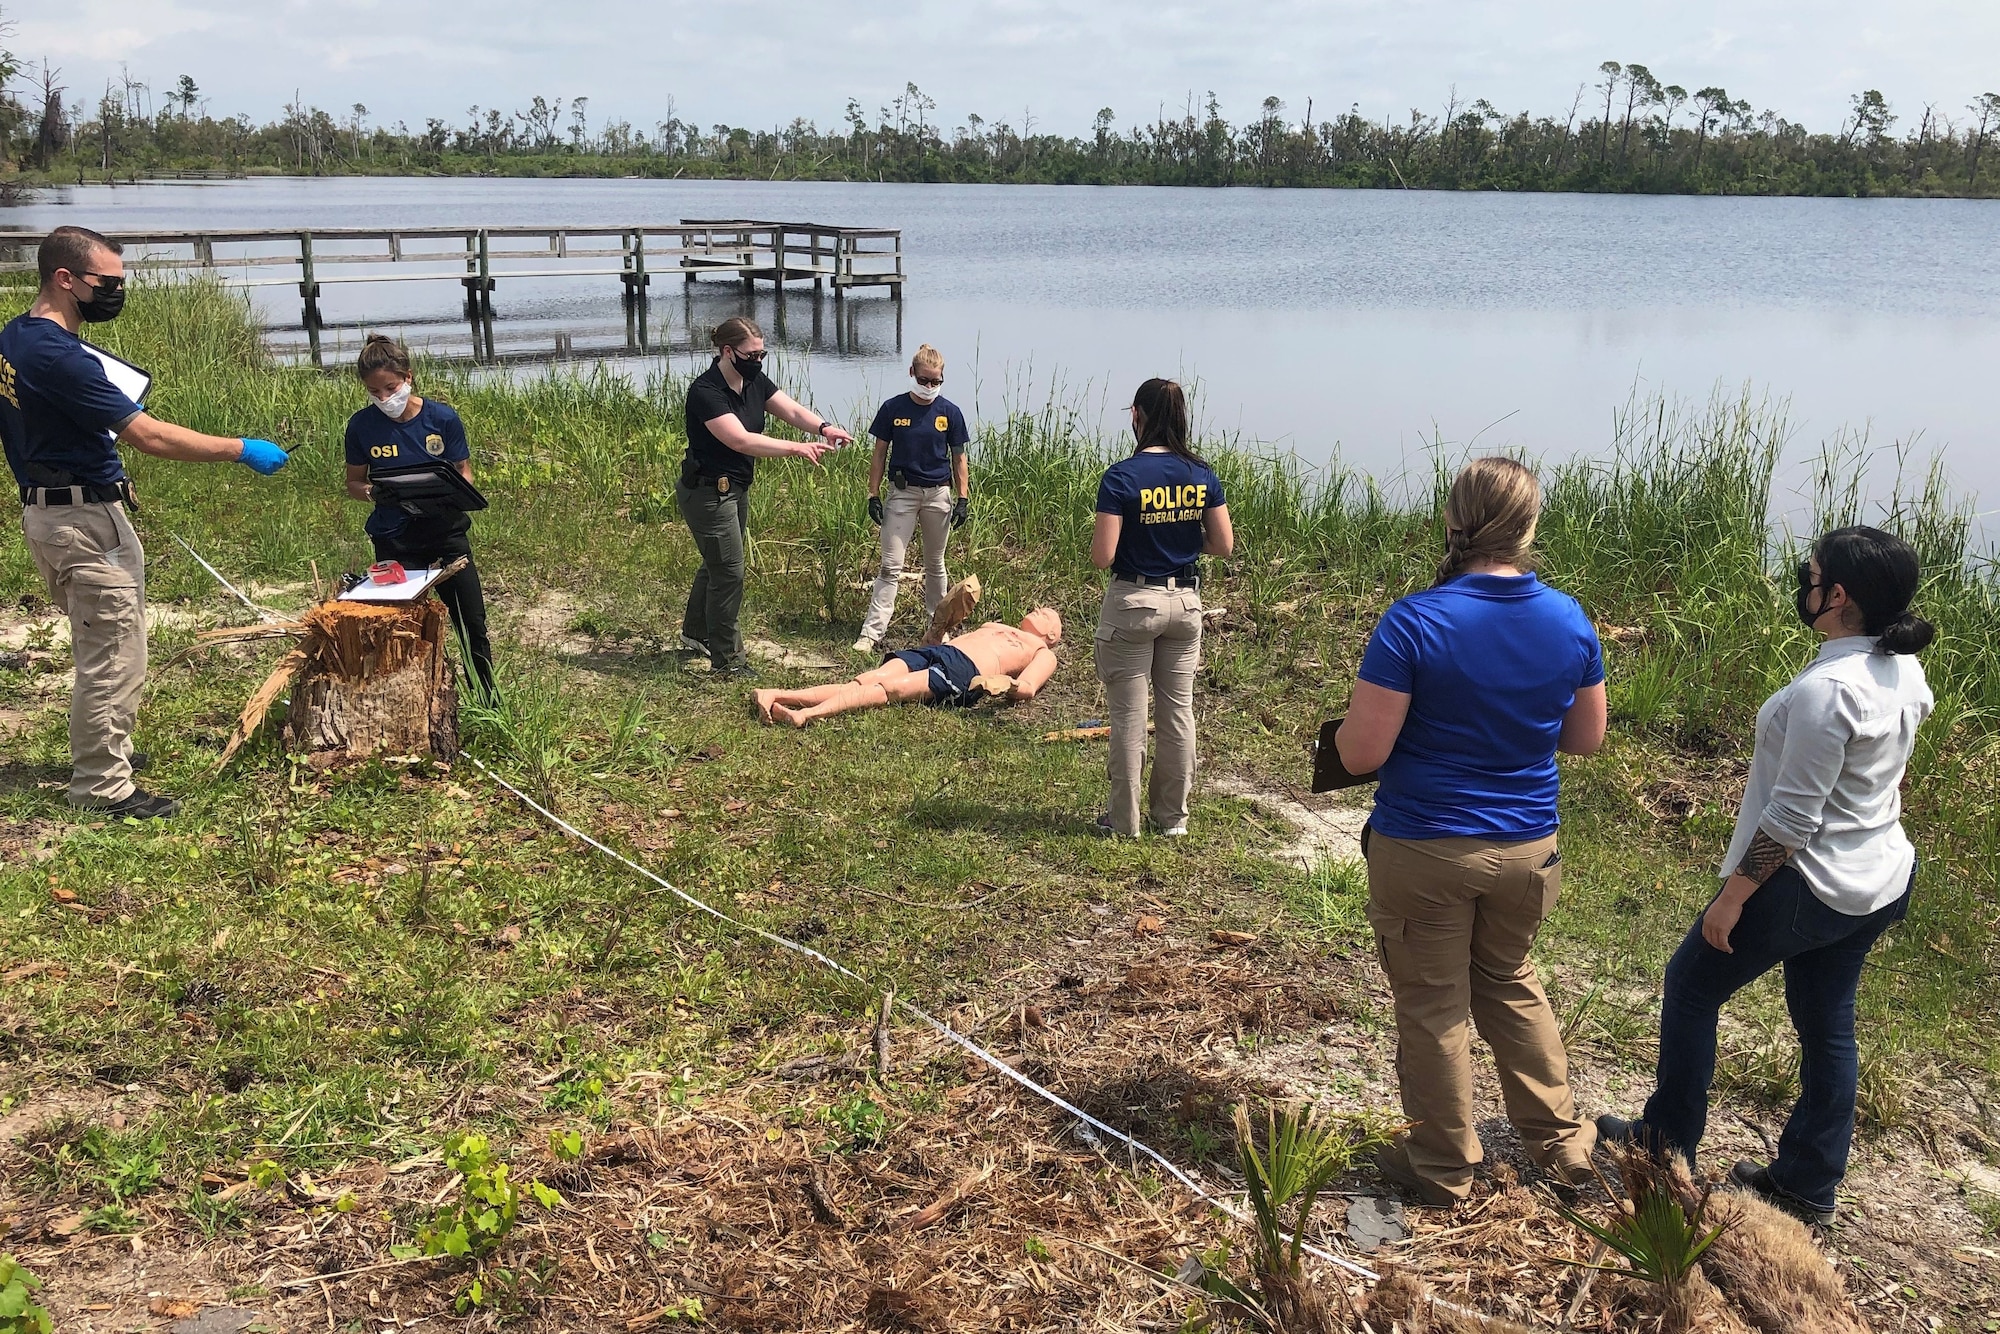 Special Agents from Office of Special Investigations Detachment 223, team with a 2nd Field Investigations Squadron Forensic Science Consultant and Investigators from the 325th Security Forces Squadron Investigations, to process a crime scene scenario during an exercise at Tyndall Air Force Base, Fla., April 30, 2021. (Photo by SA Kevin Sucher)